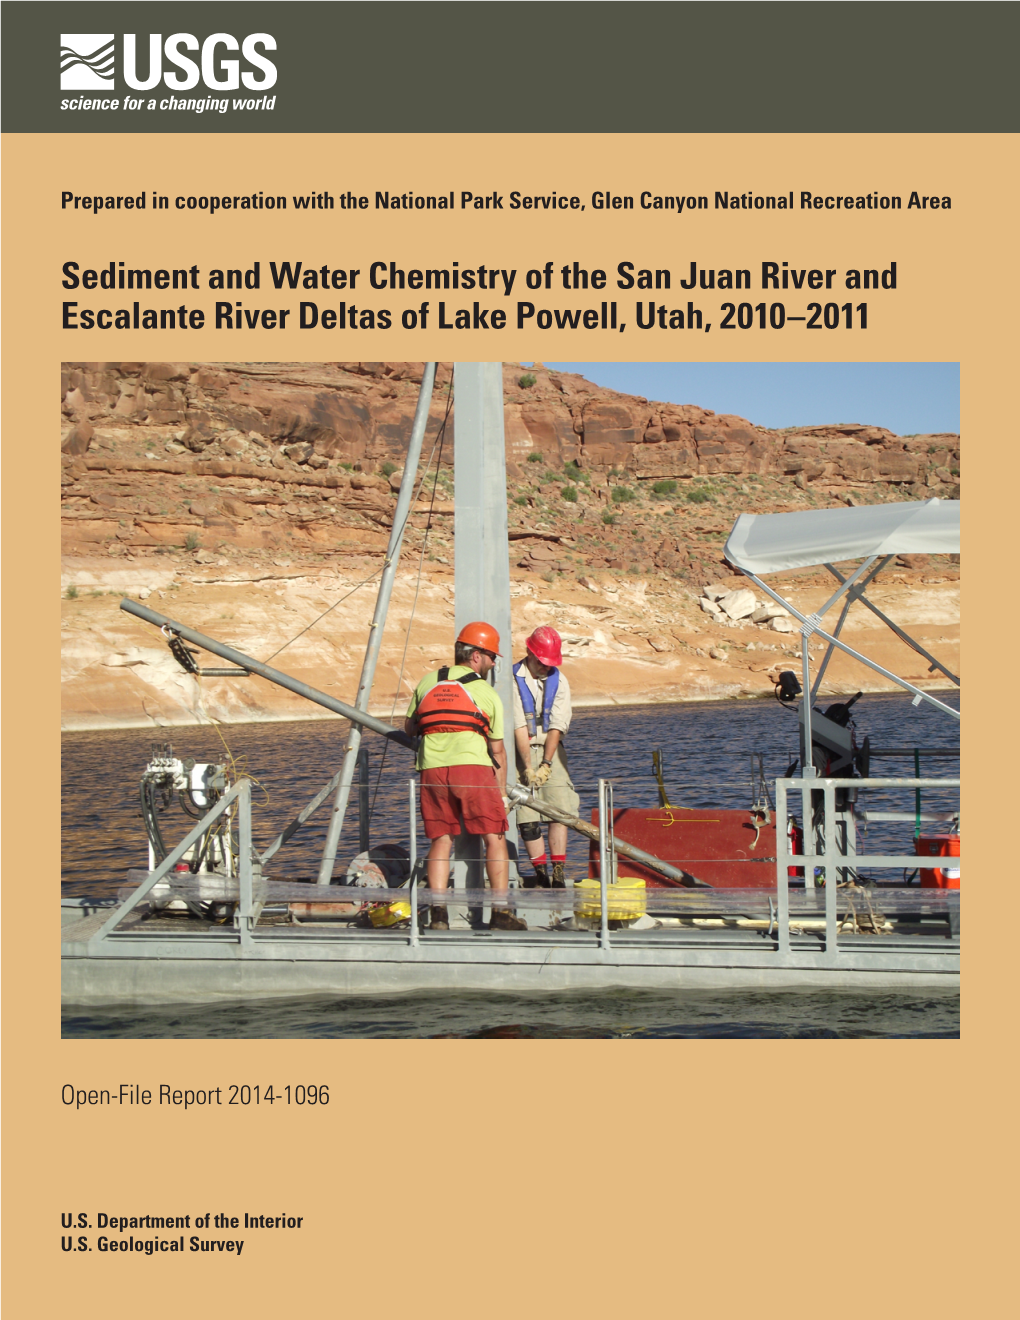 Sediment and Water Chemistry of the San Juan River and Escalante River Deltas of Lake Powell, Utah, 2010–2011